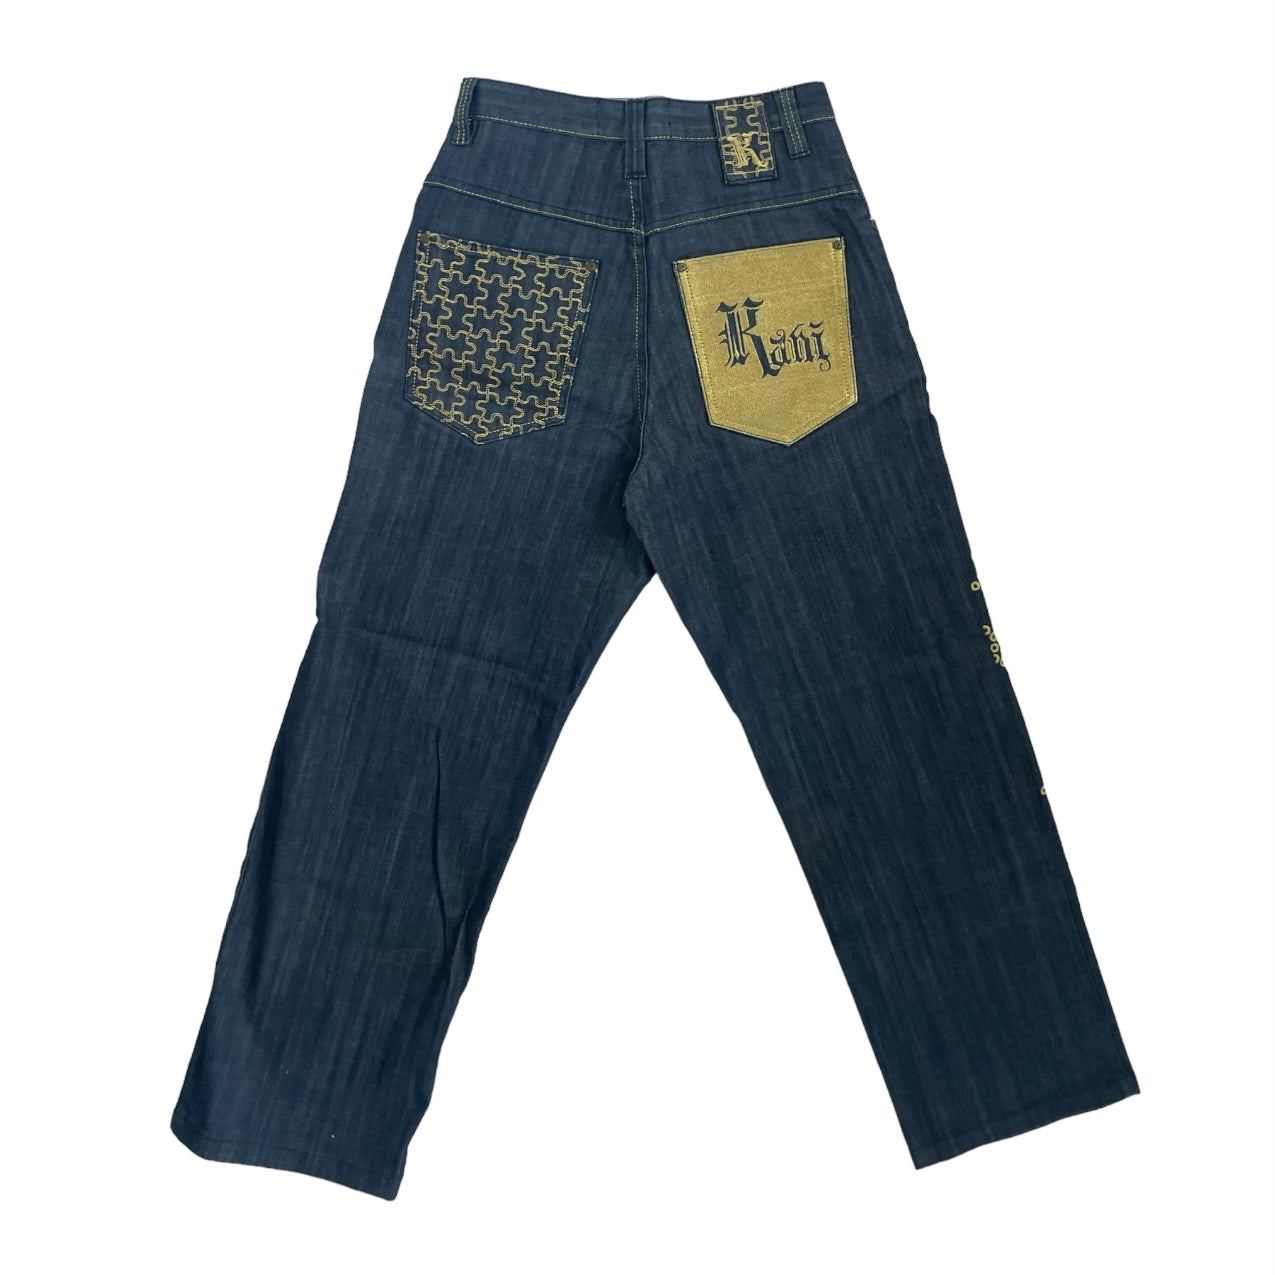 Karl Kani Puzzle Baggy Jeans